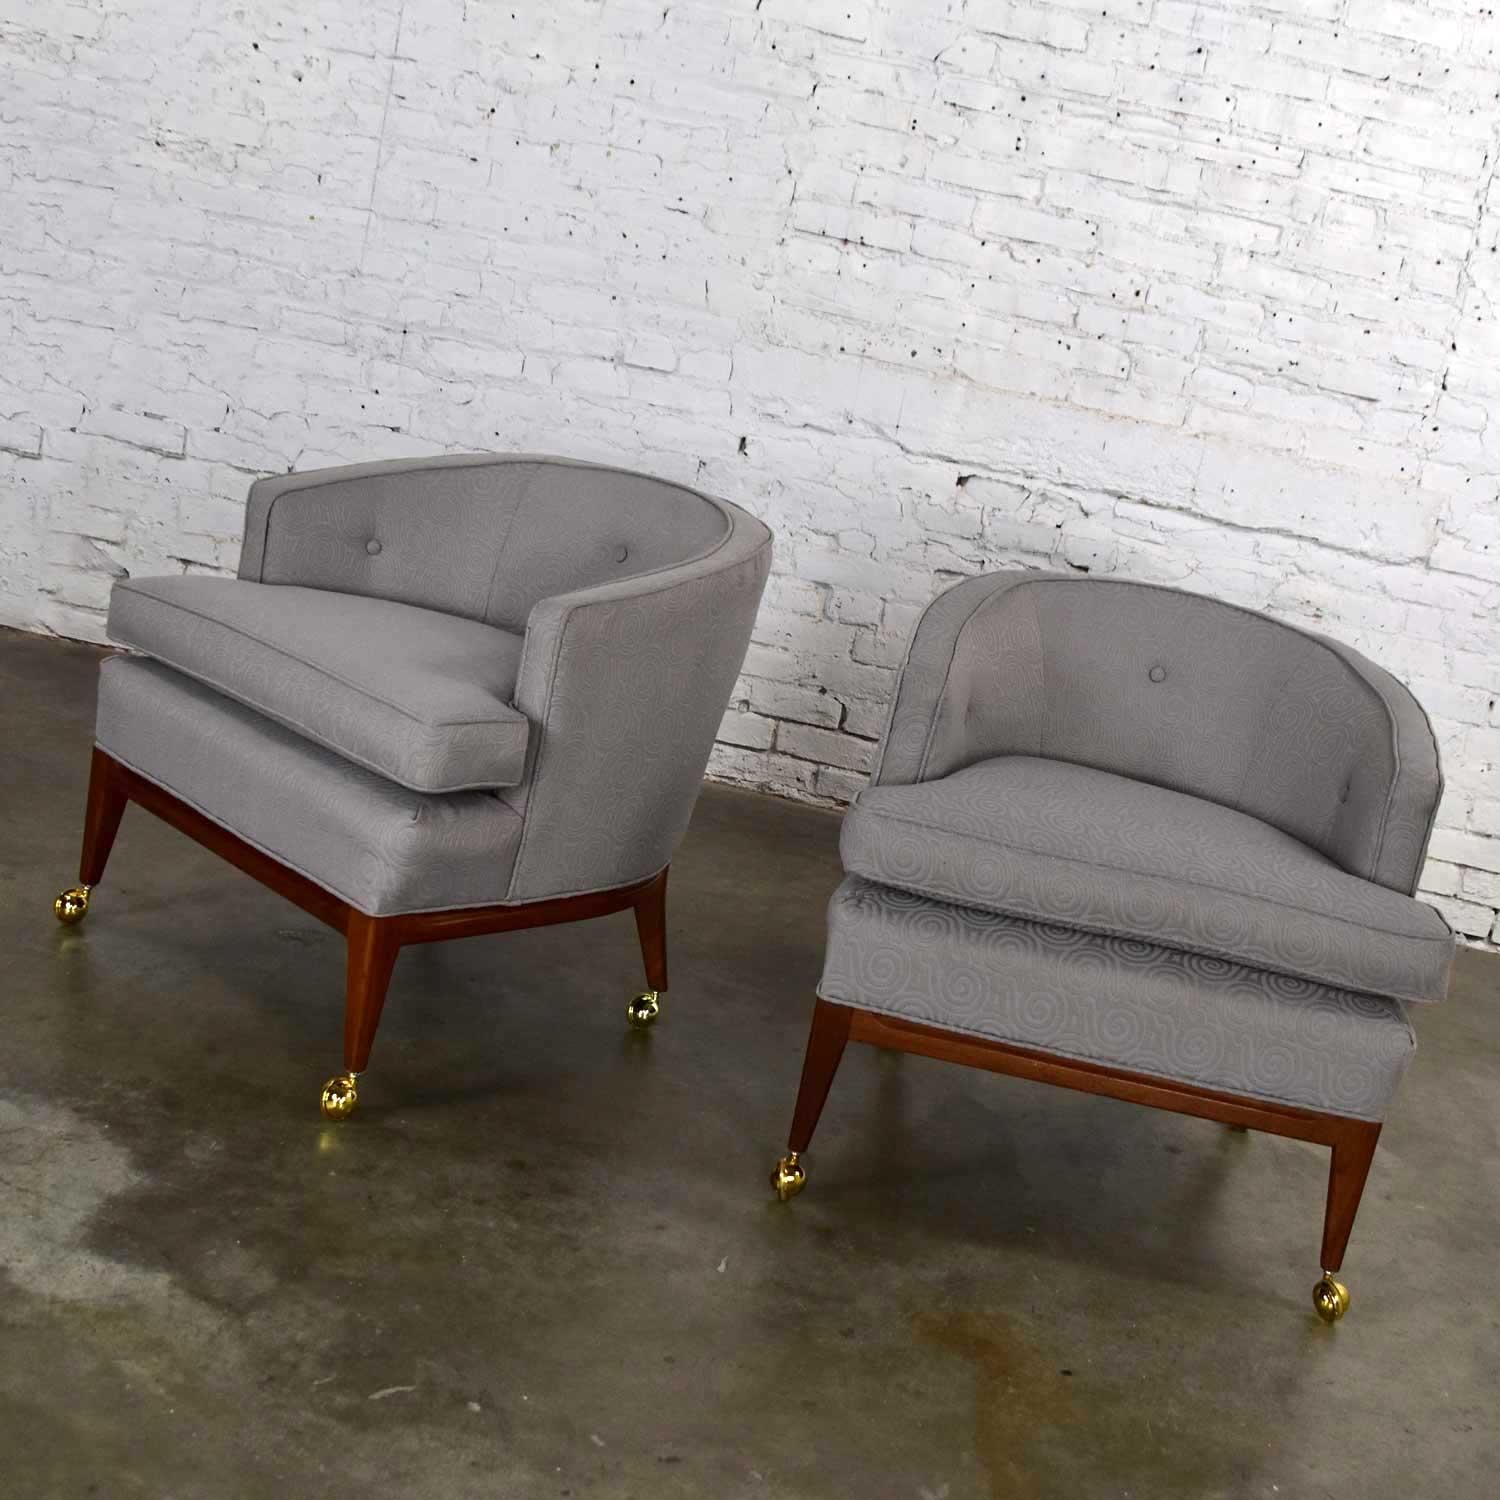 Awesome pair of Mid-Century Modern (MCM) barrel back club chairs in the style of Harvey Probber. Newly upholstered in a grey and taupe textured spiral fabric, buttons on the seatbacks, wooden base, and legs with casters. These have been newly